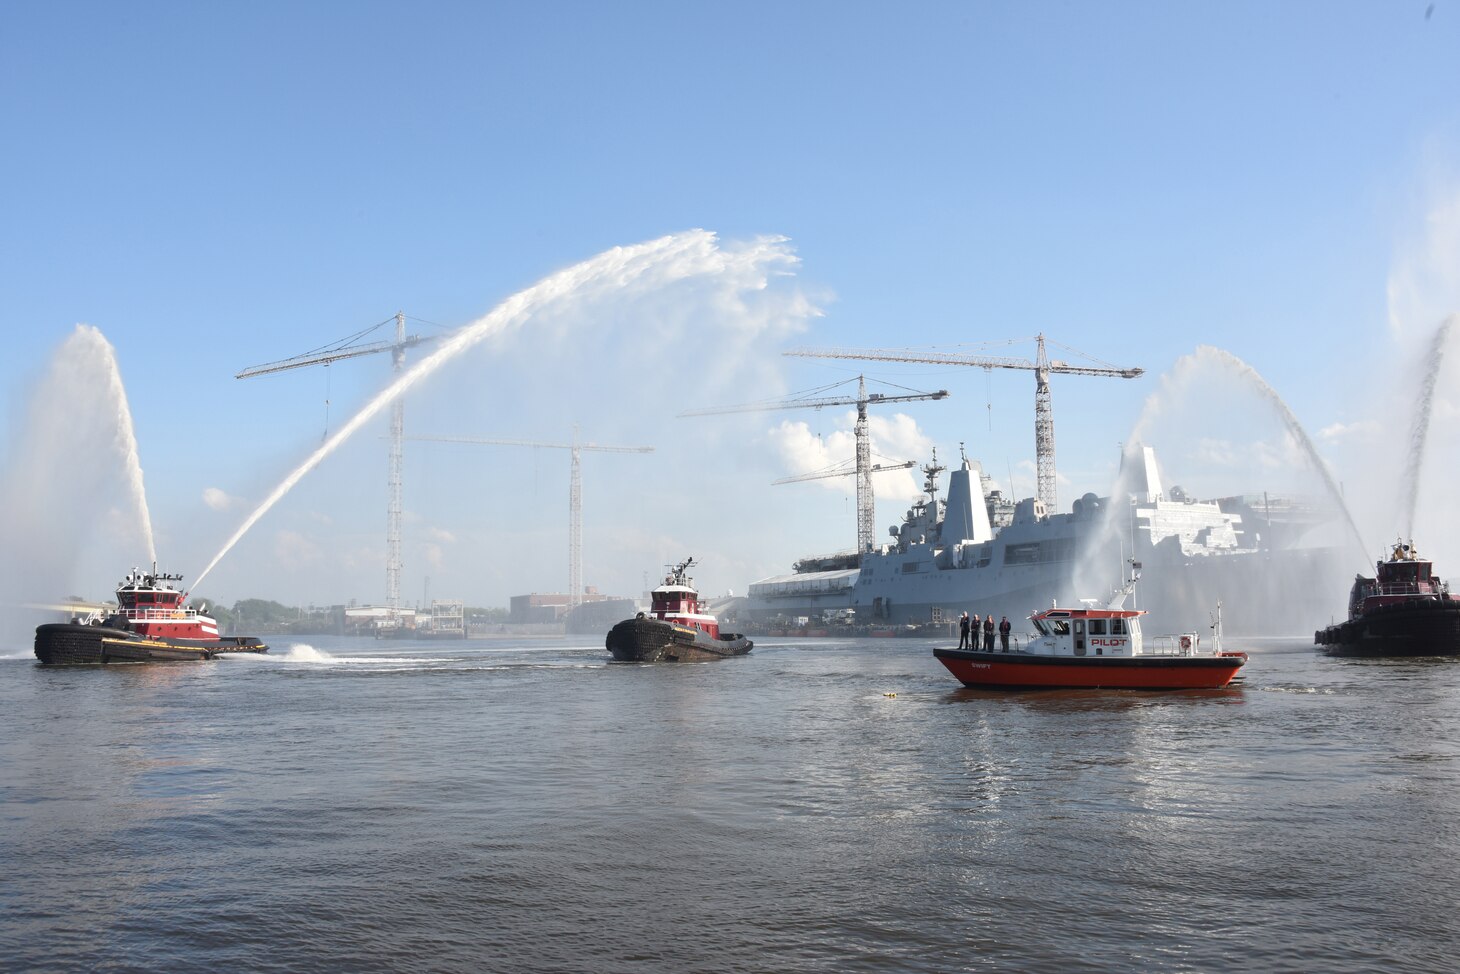 Tugboats jettison water into the air during a ‘water salute’ held in honor of National Maritime Day in downtown Norfolk, Virginia, May 19.